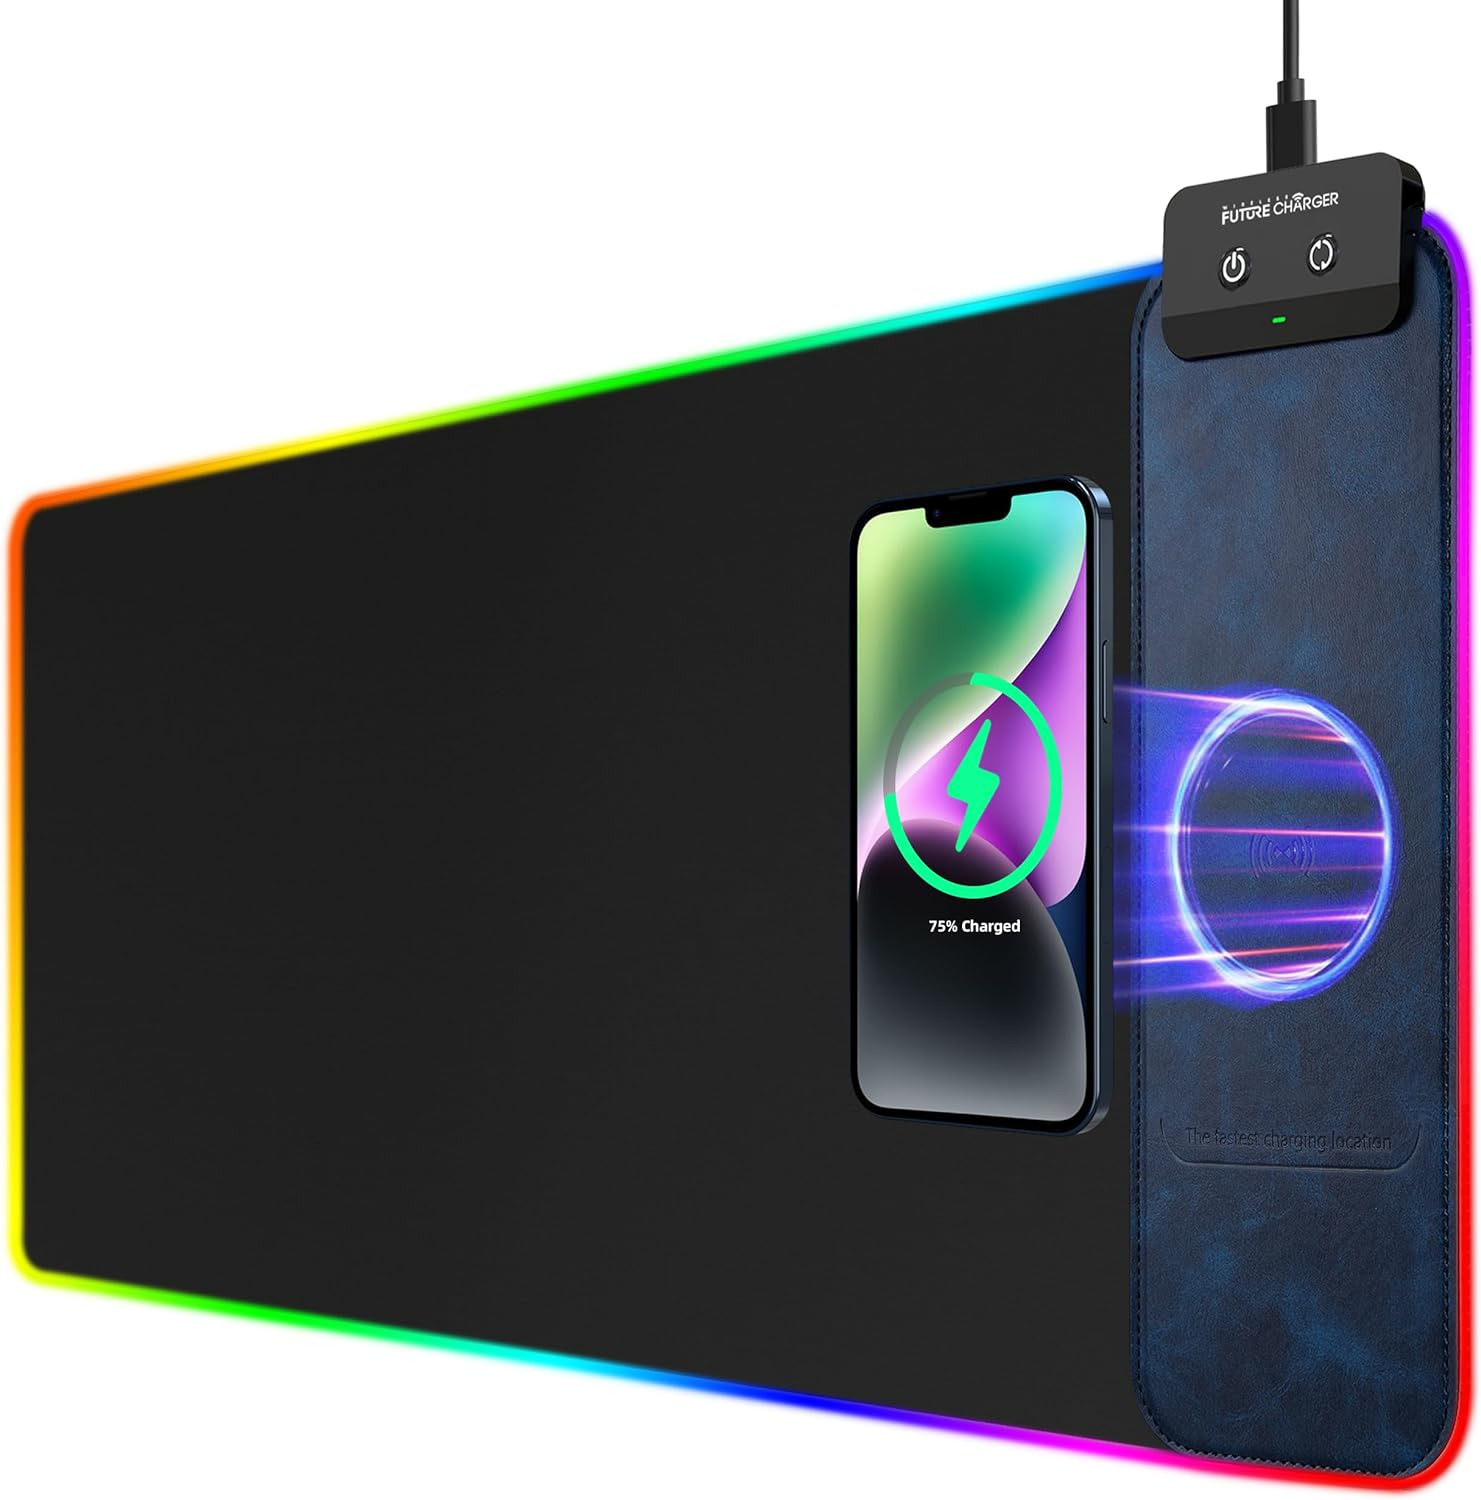 Gaming Mouse Pad with Wireless Charger Pad Dock 10W Charging For iPhone and Sams